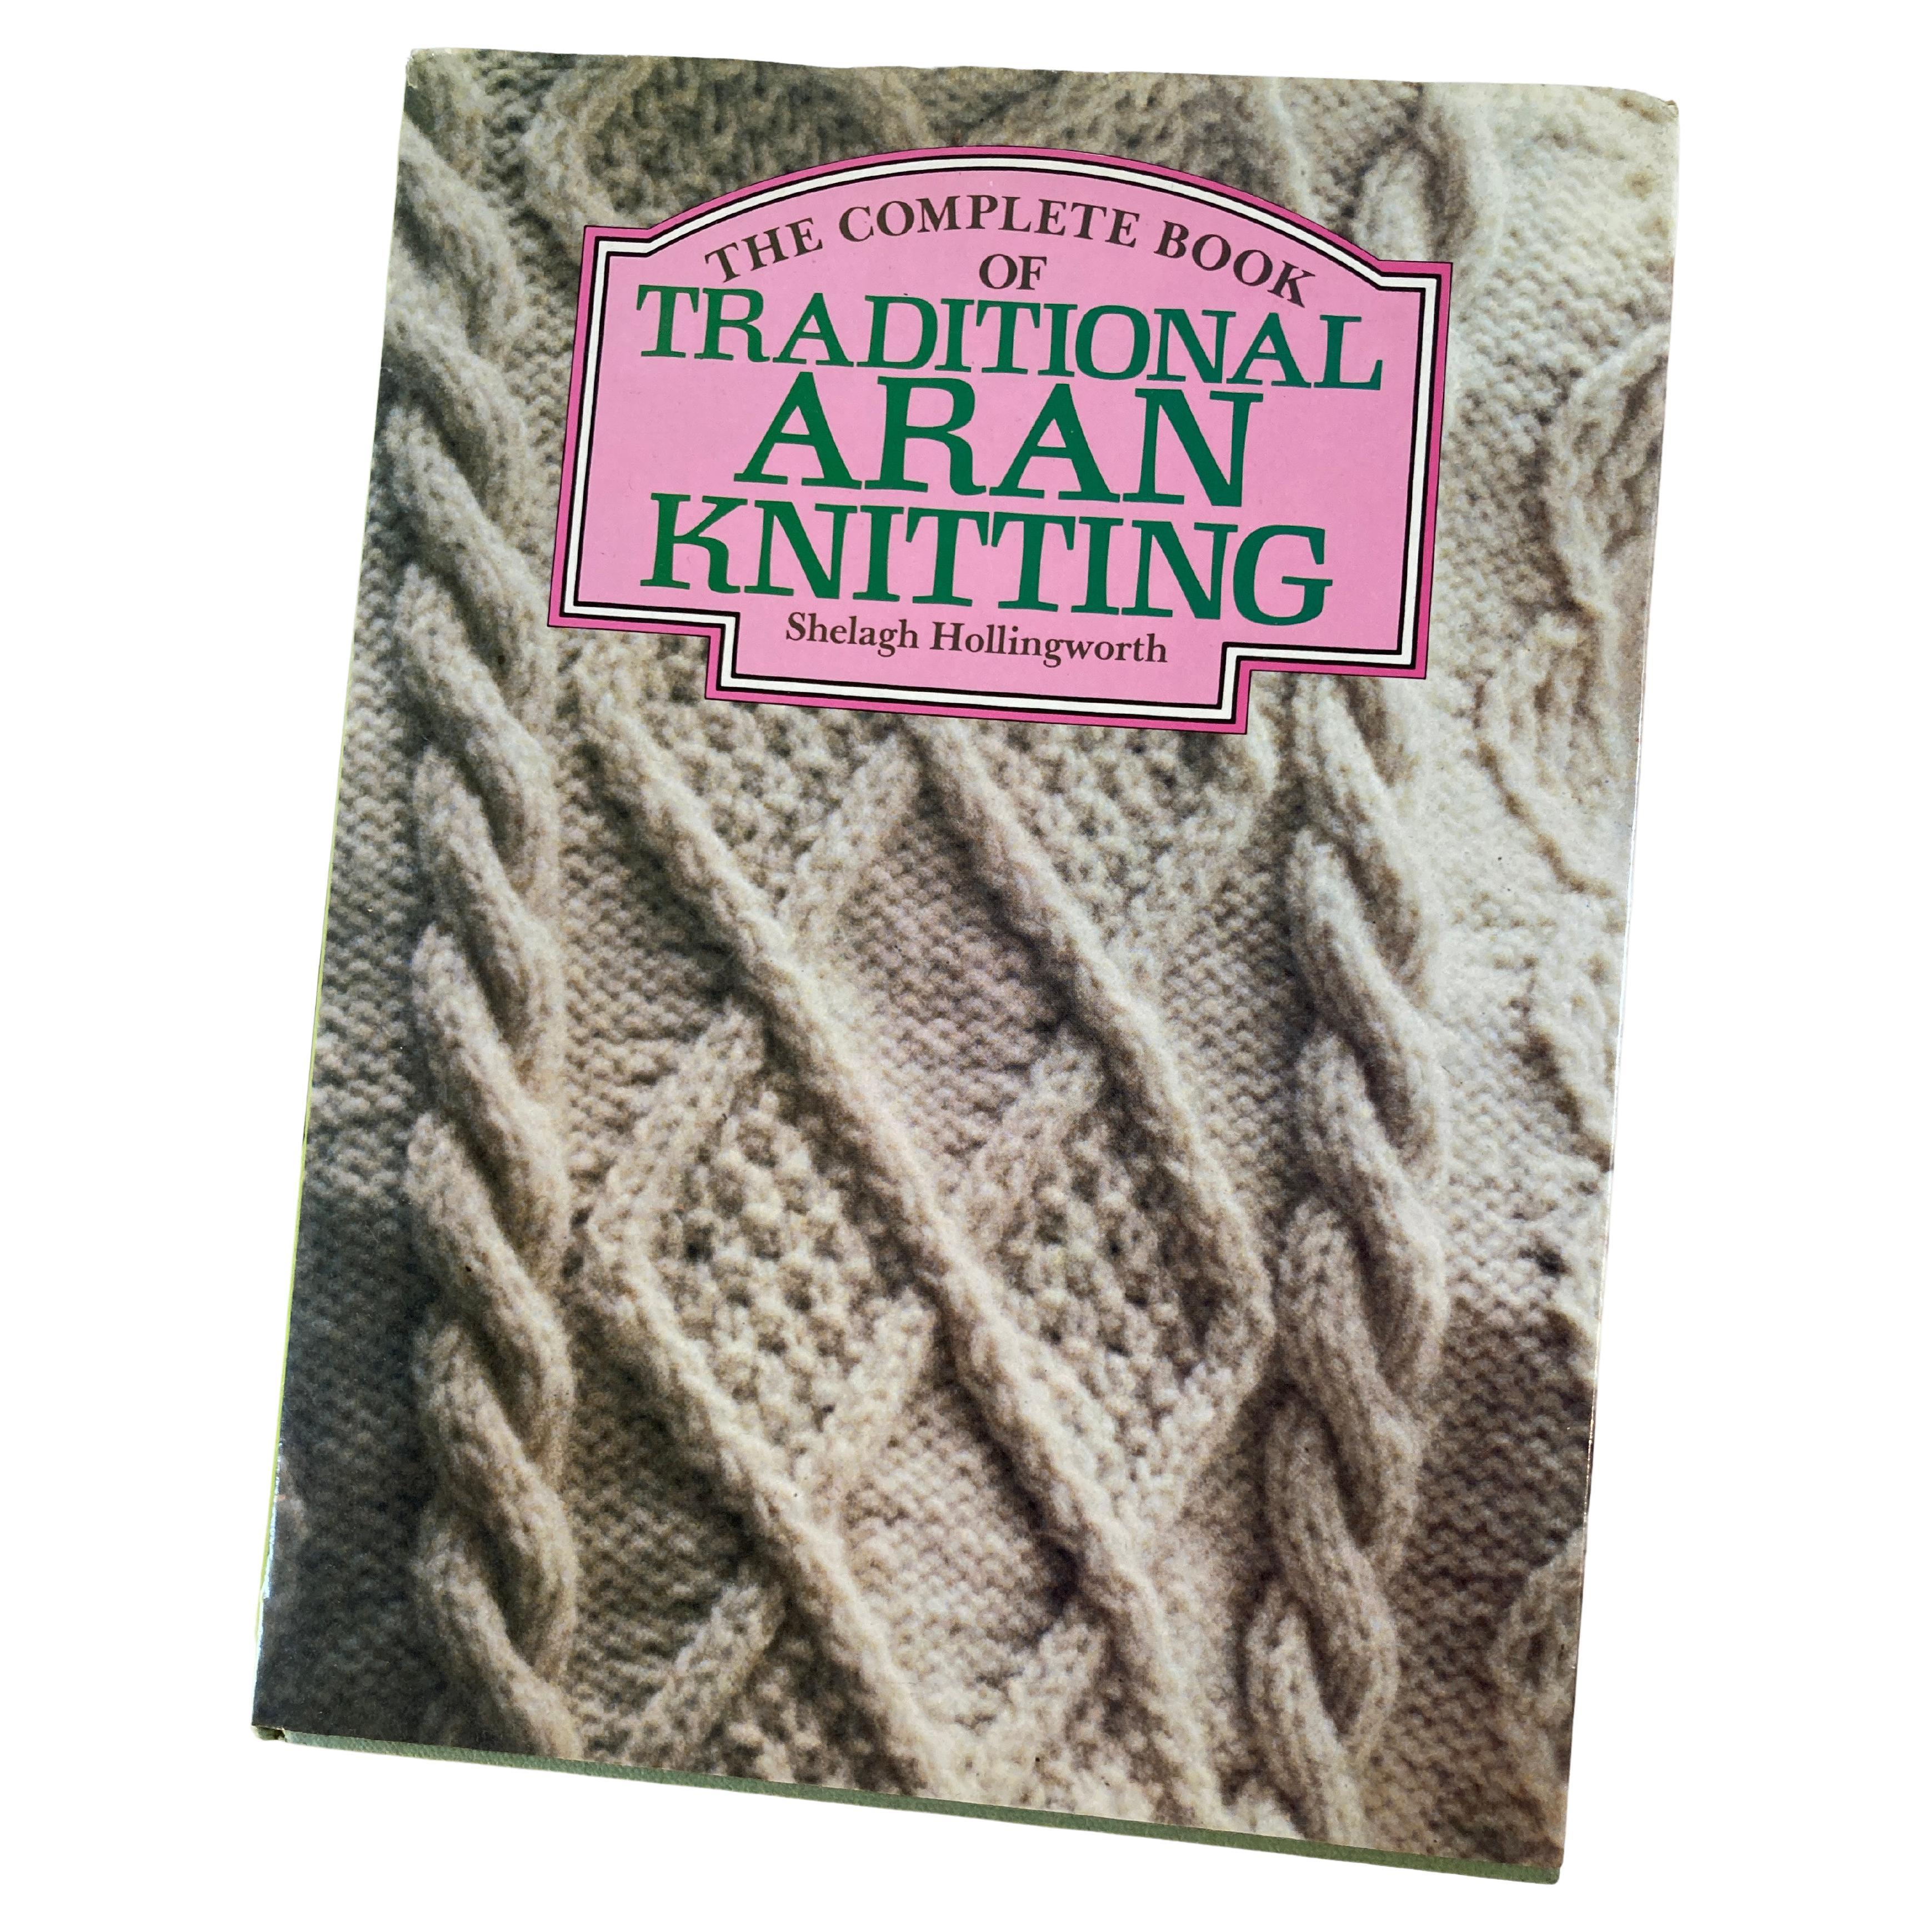 Complete Book of Traditional Aran Knitting by Shelagh Hollingworth 1982